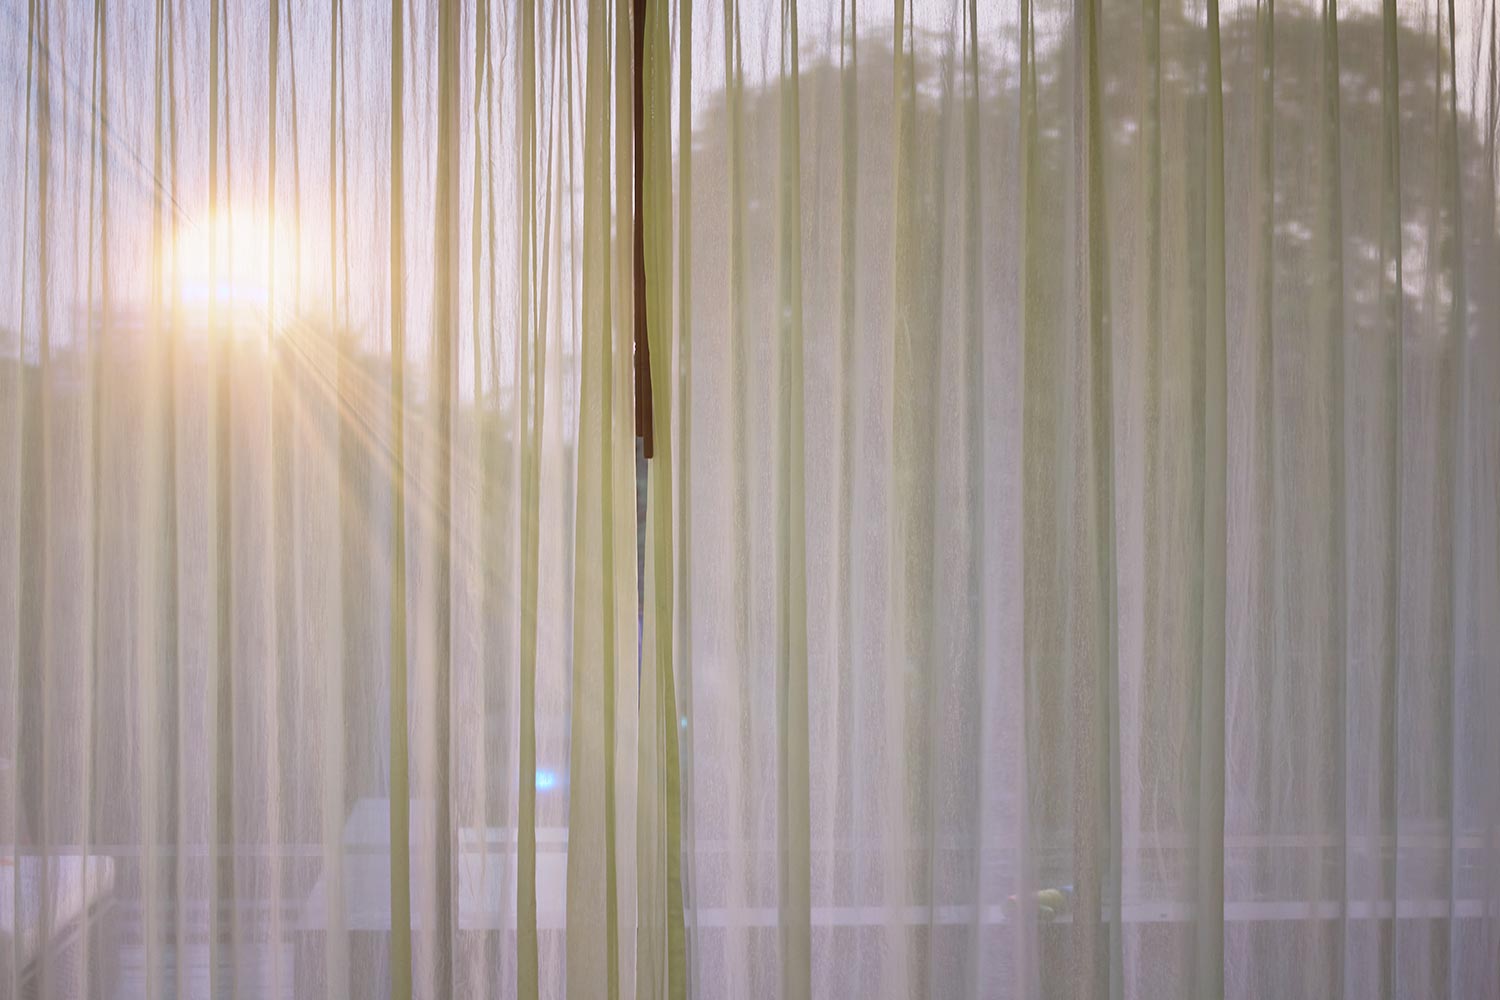 Curtain at window with sun